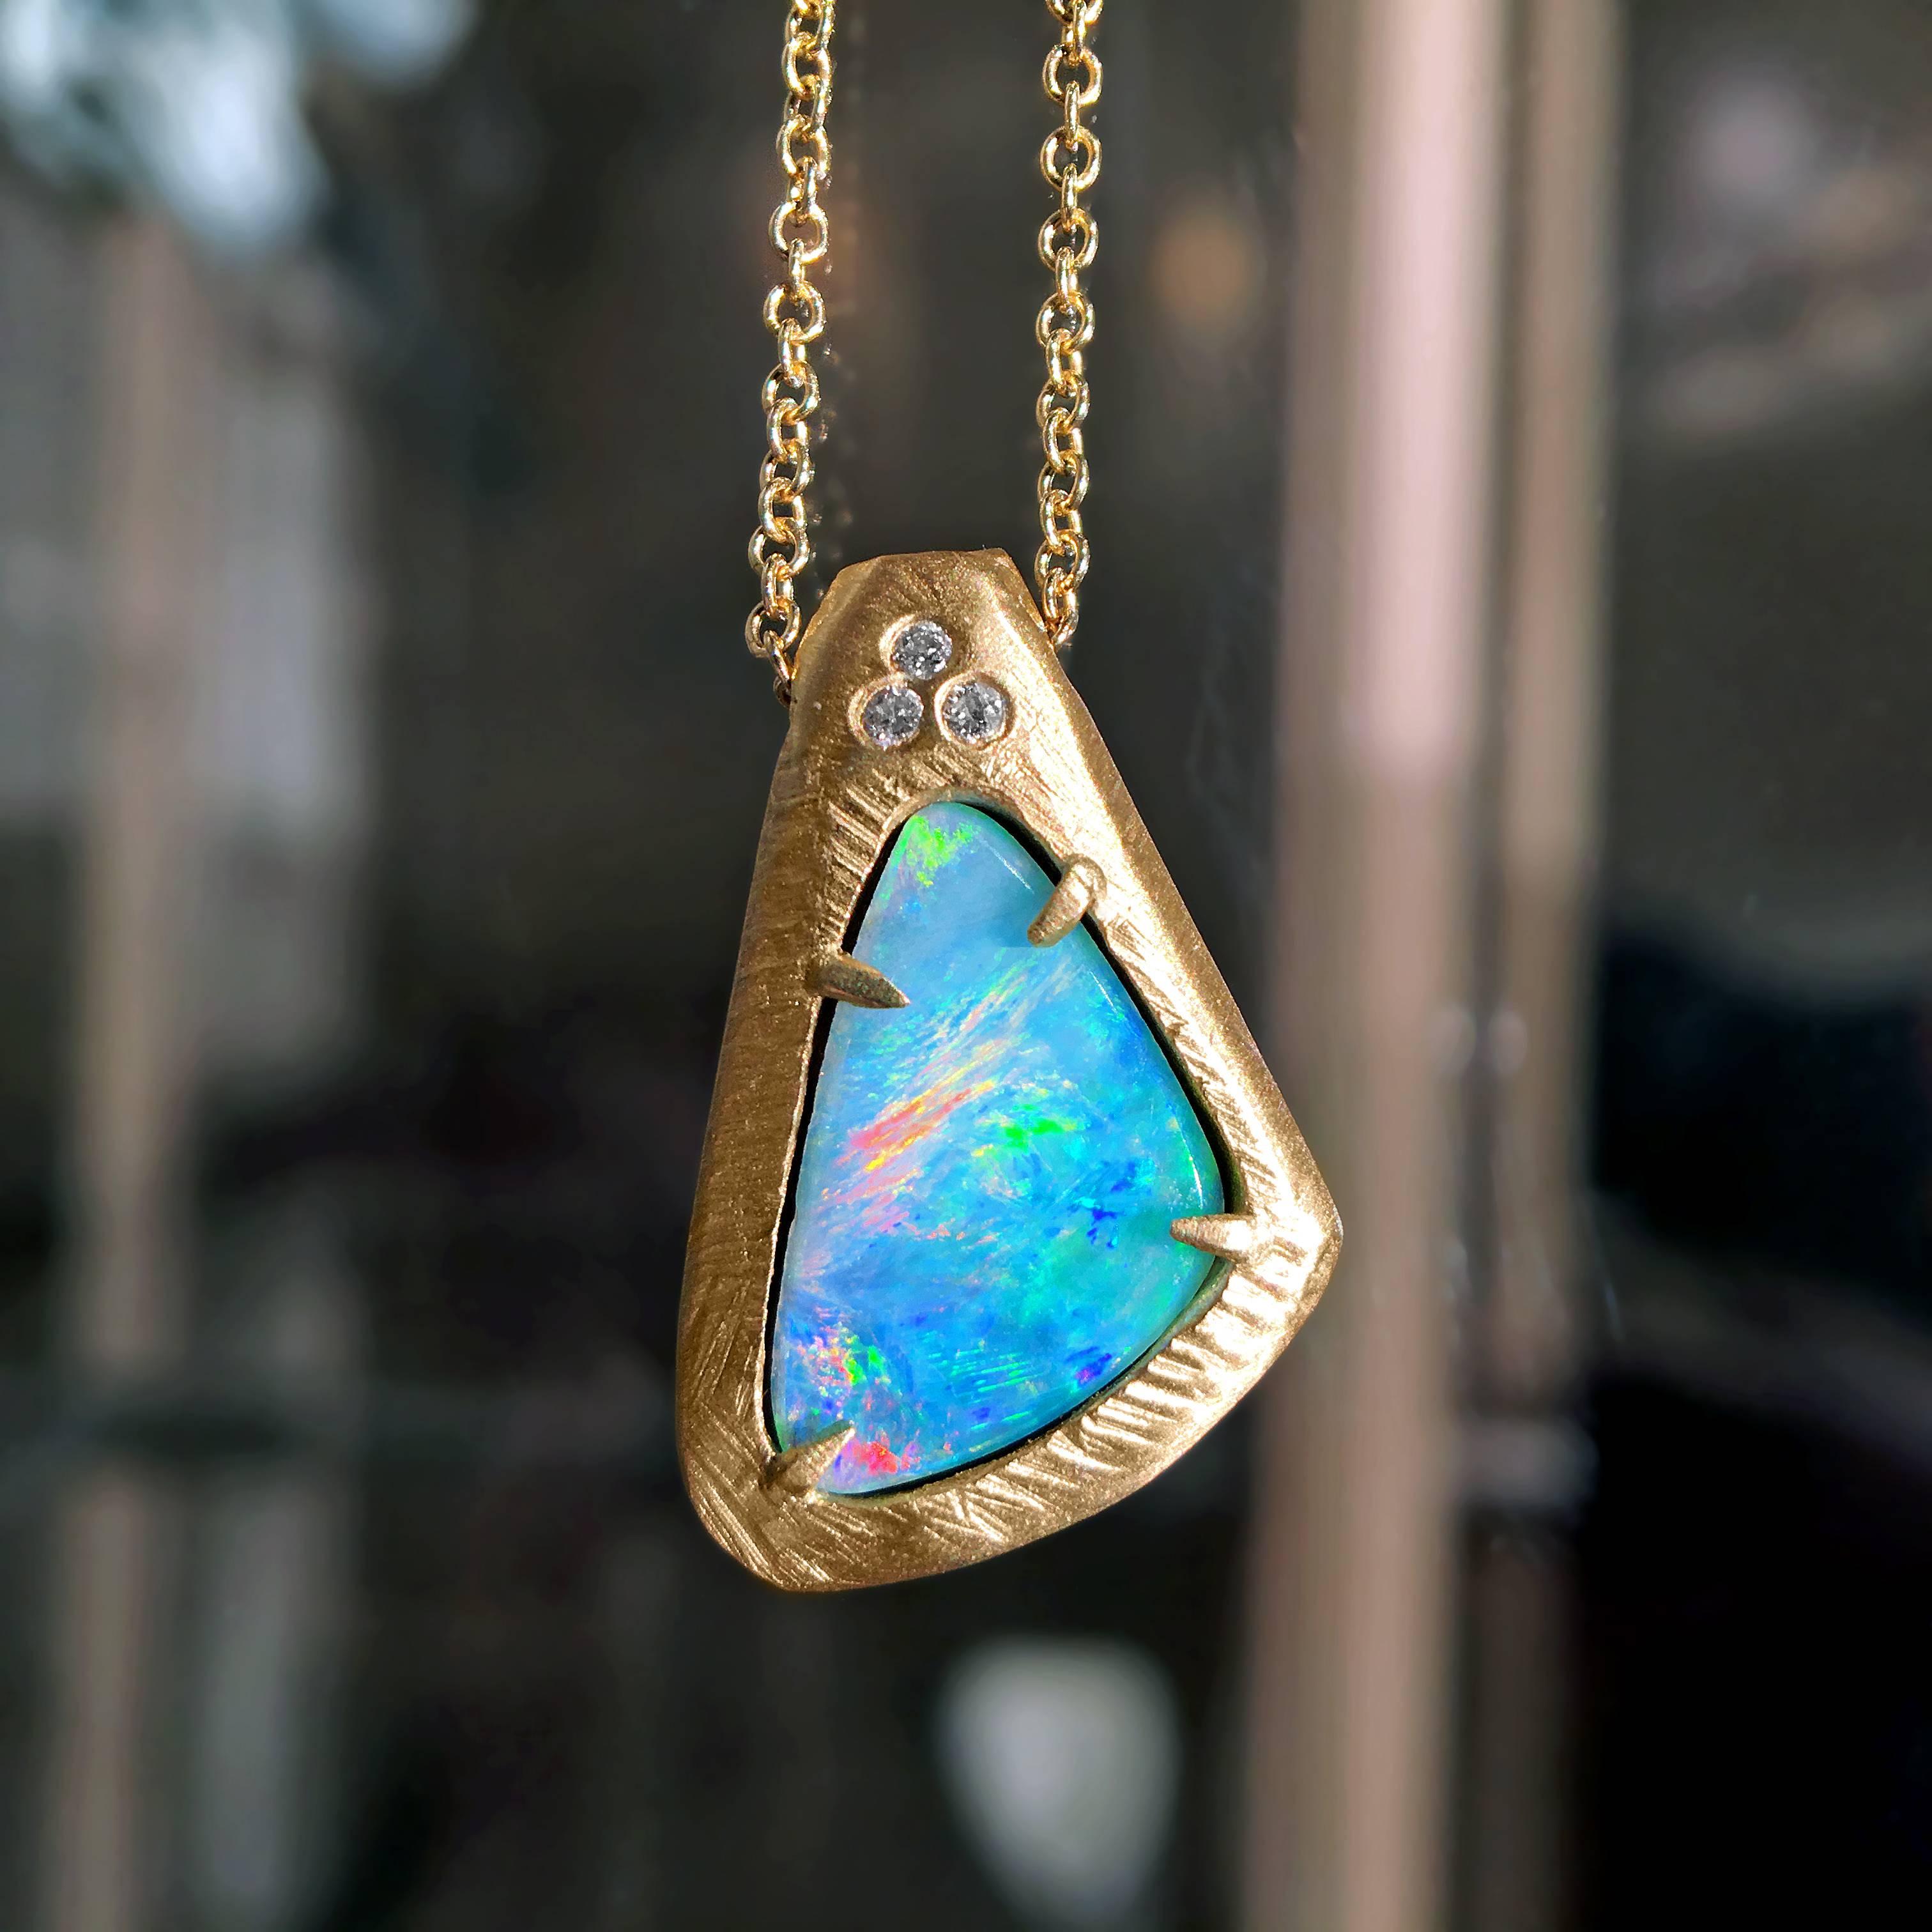 One of a Kind Necklace handcrafted in New York in textured and matte-finished 18k yellow gold featuring a fiery Australian boulder opal set by four claws and accented with three round brilliant-cut white diamonds. On a 16.5 inch 18k yellow gold